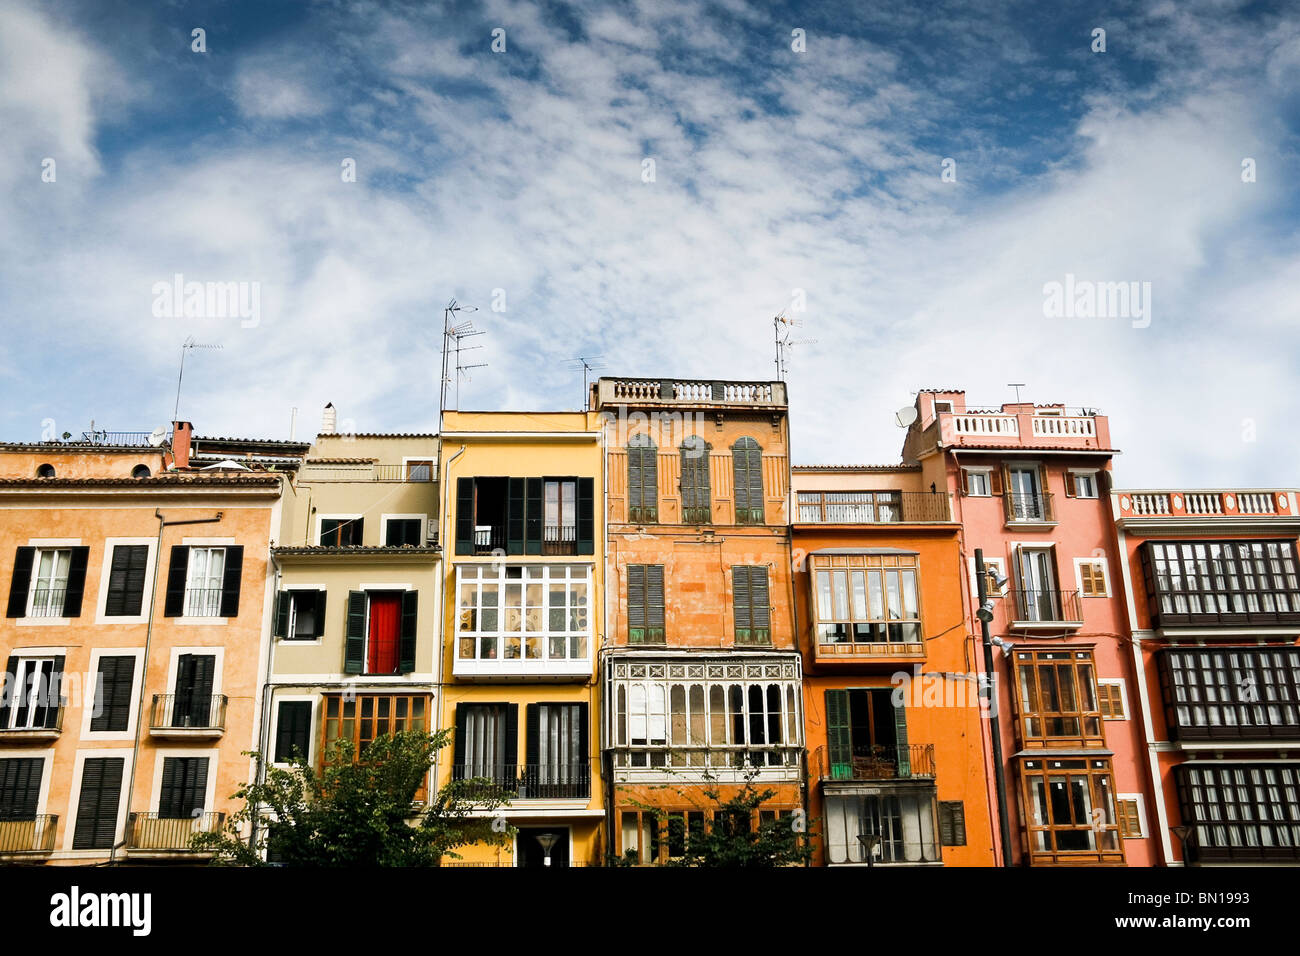 Colourful buildings in the historic Old Town of Palma, Mallorca Stock Photo